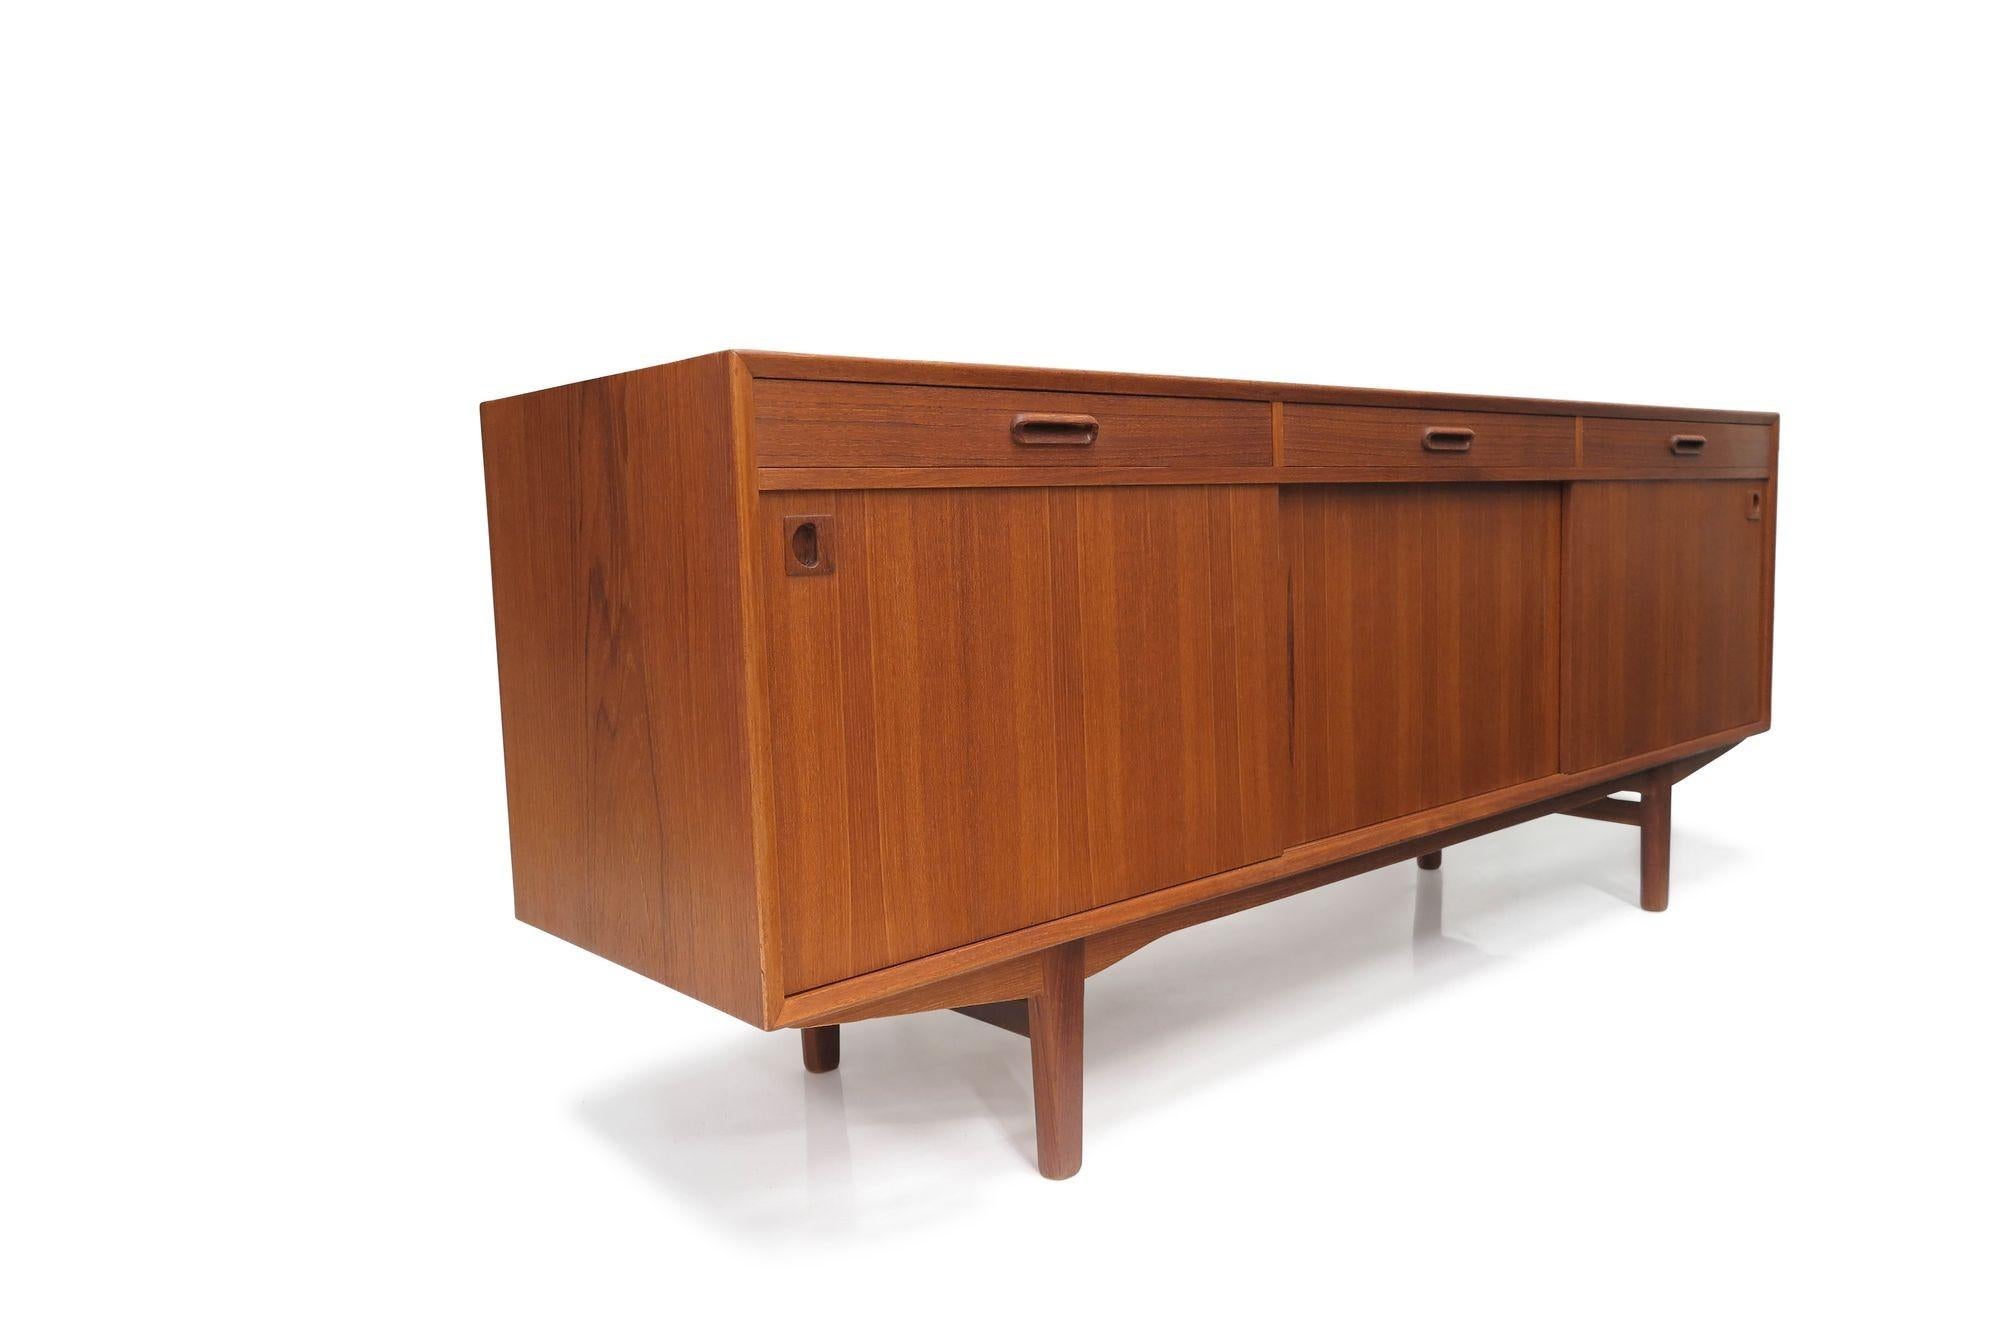 Mid-century teak credenza with three sliding cabinet doors and three drawers opening to reveal an interior of teak with adjustable shelves.
Measurements
W 78,75'' x D 19,75'' x H 31''